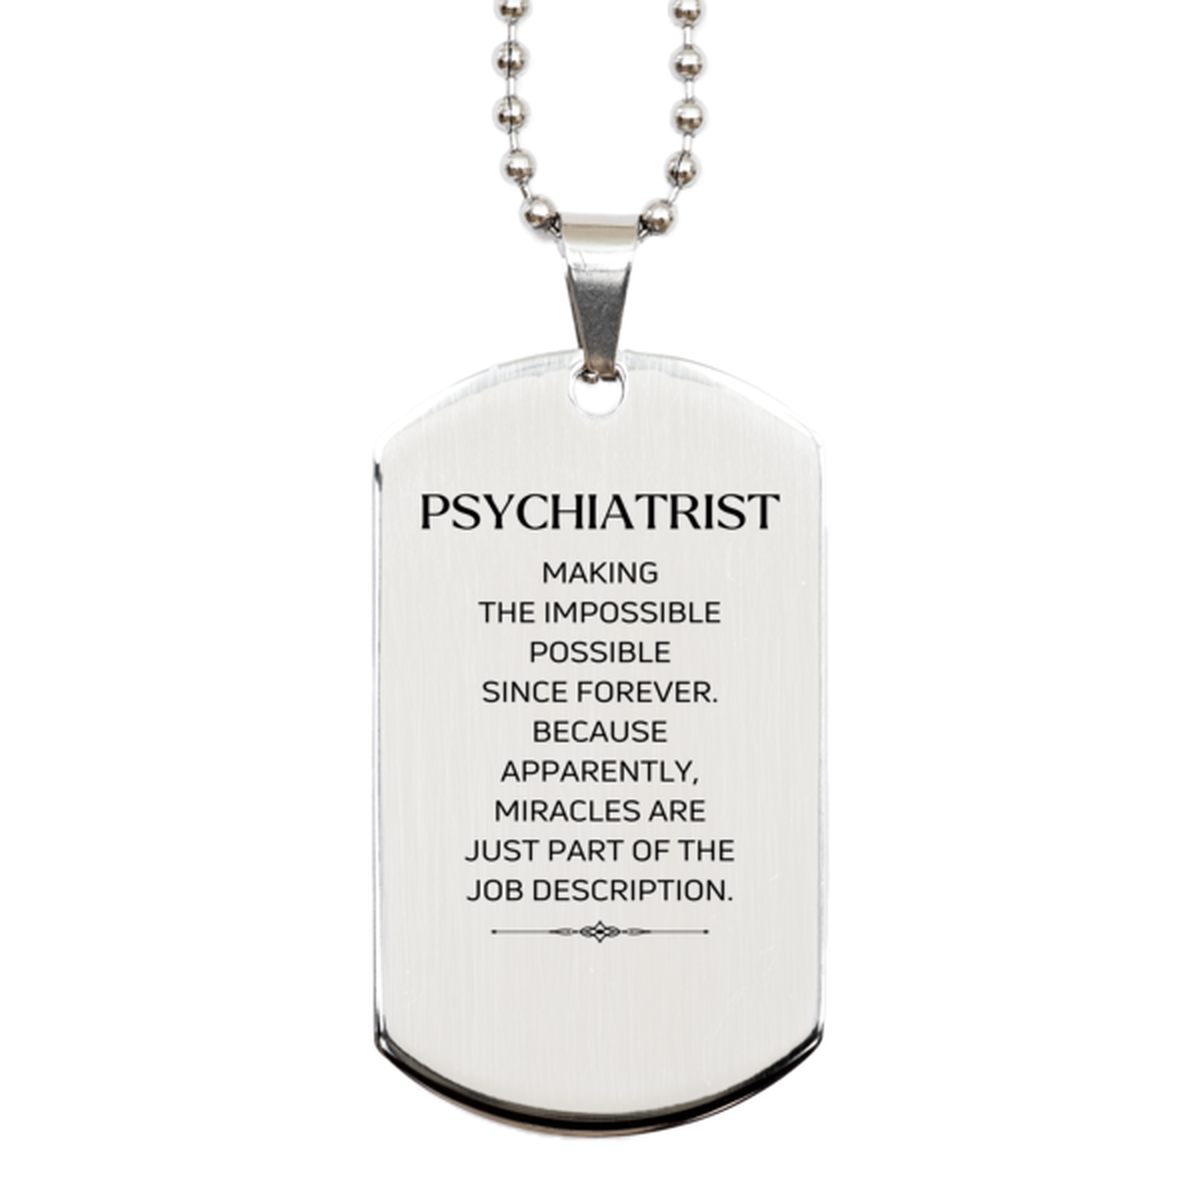 Funny Psychiatrist Gifts, Miracles are just part of the job description, Inspirational Birthday Silver Dog Tag For Psychiatrist, Men, Women, Coworkers, Friends, Boss